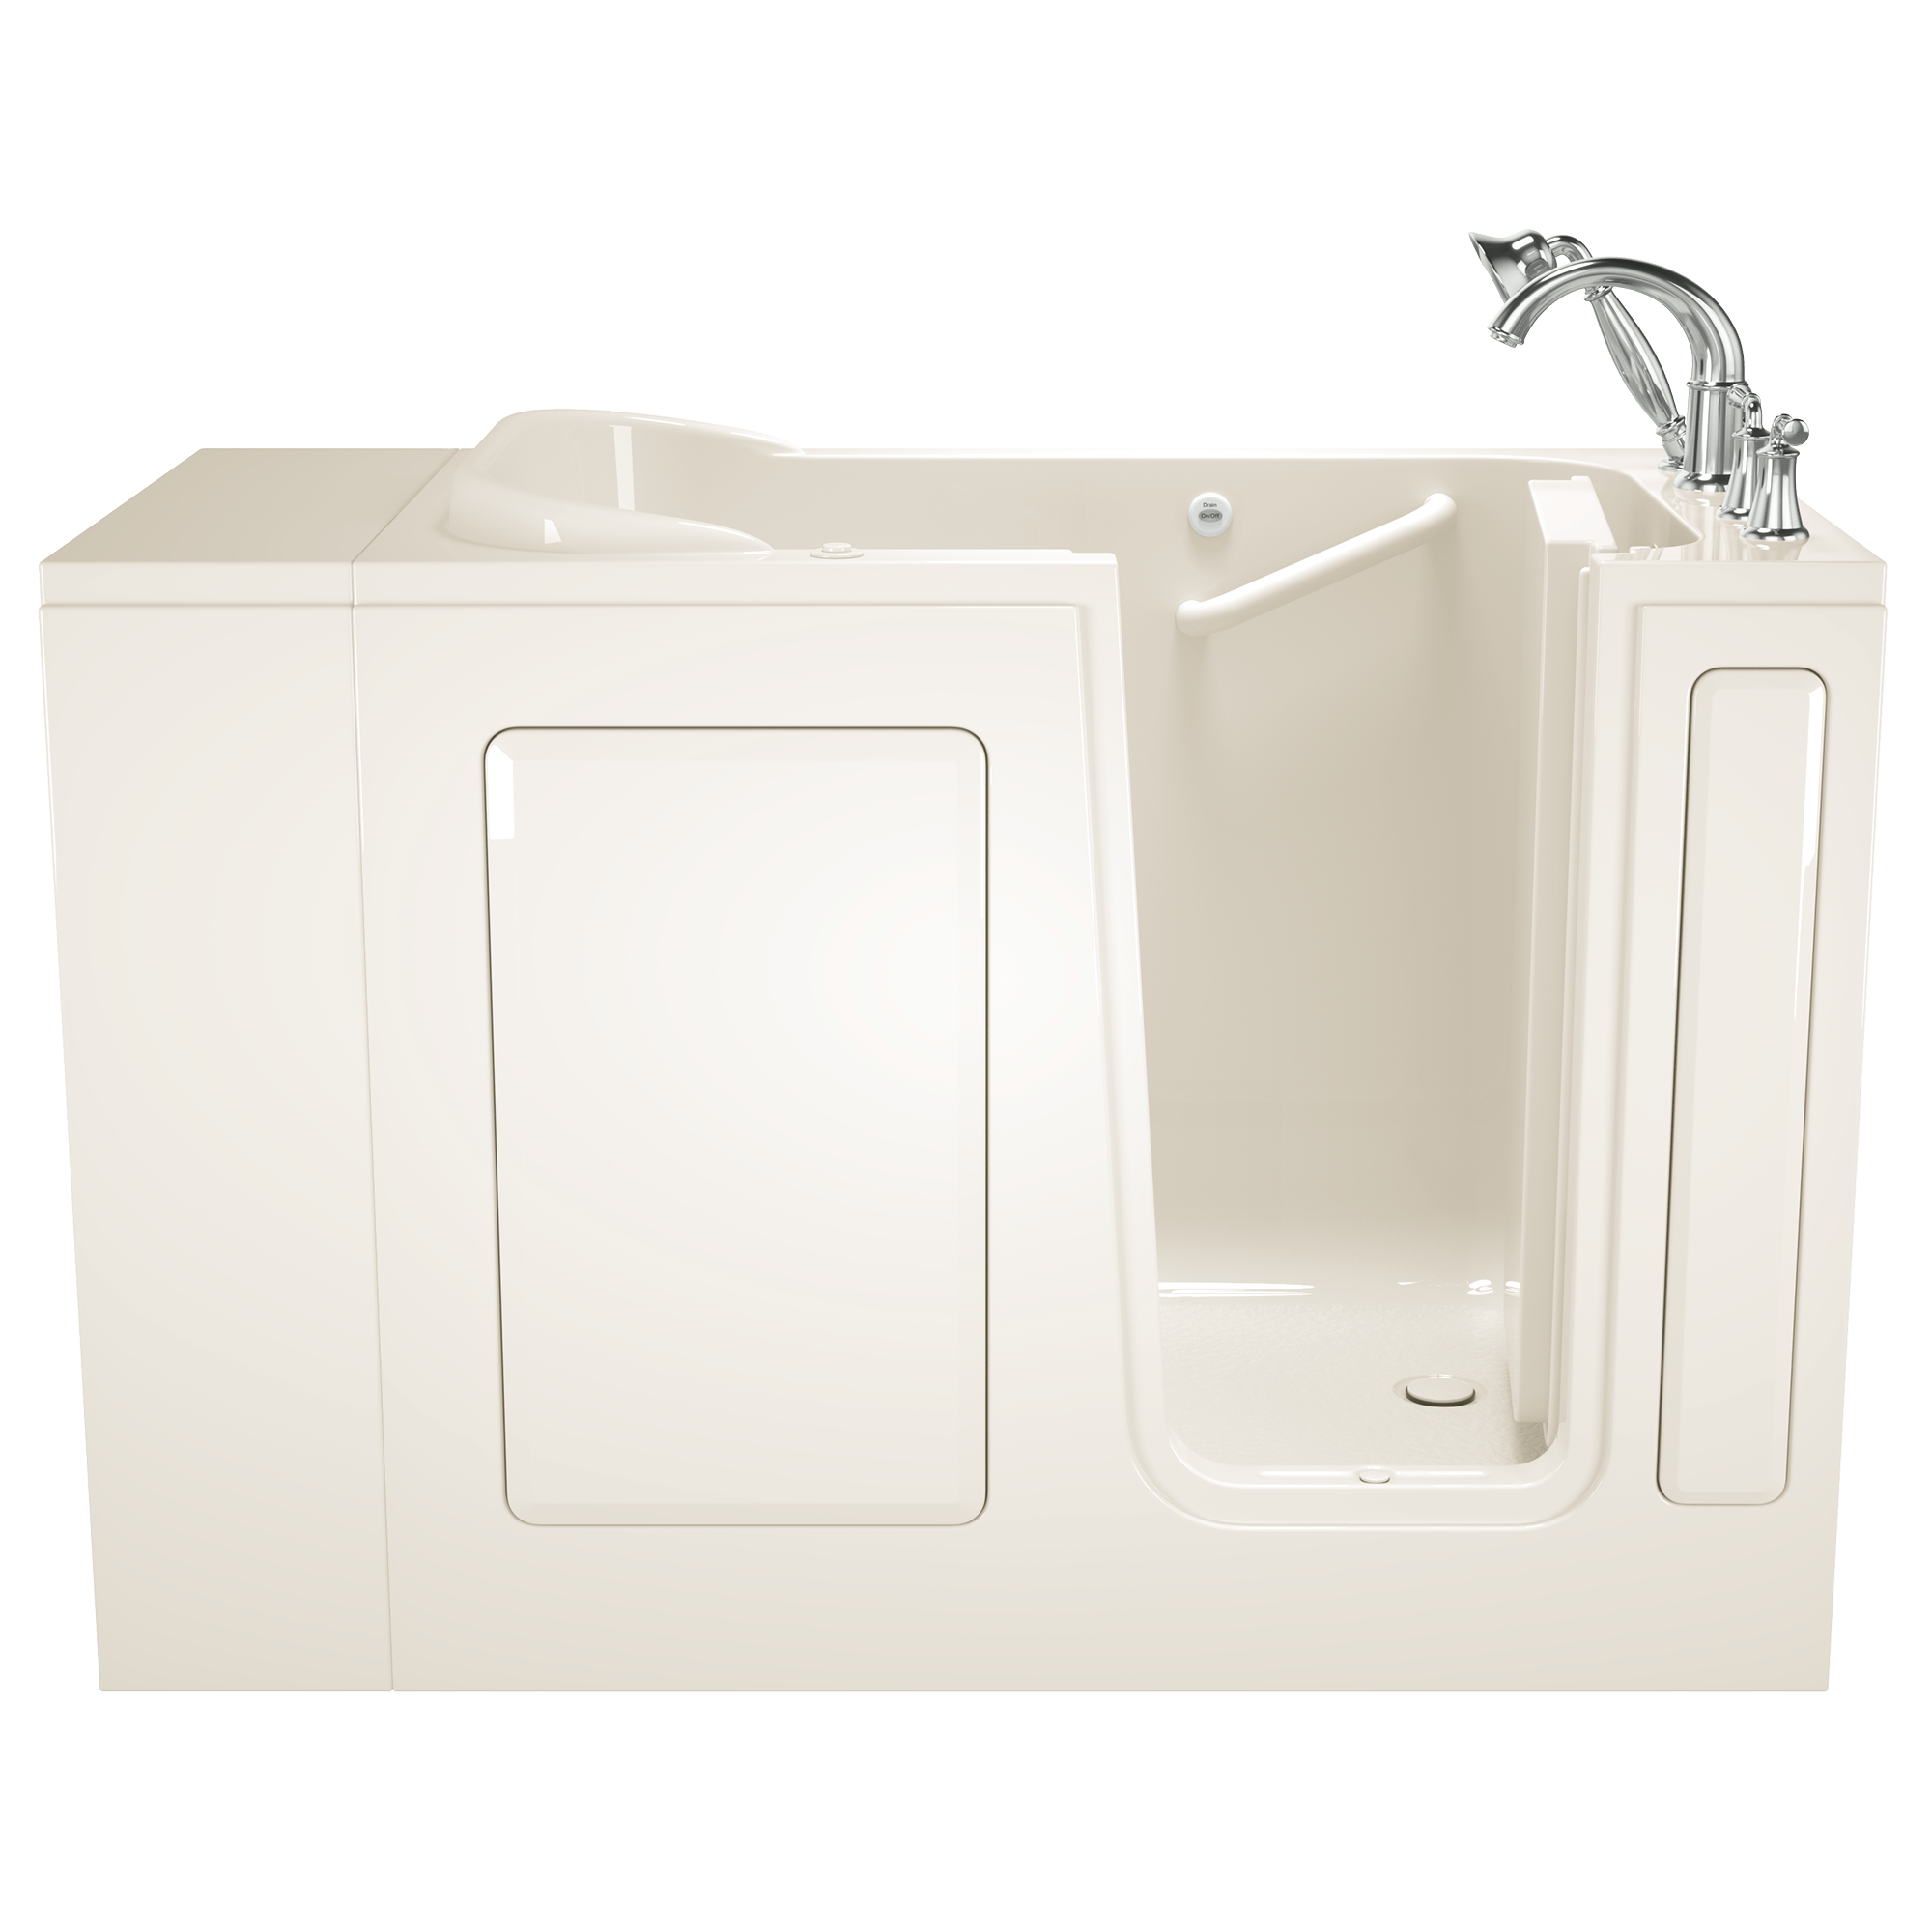 Gelcoat Value Series 28 x 48 Inch Walk in Tub With Air Spa System   Right Hand Drain With Faucet WIB LINEN